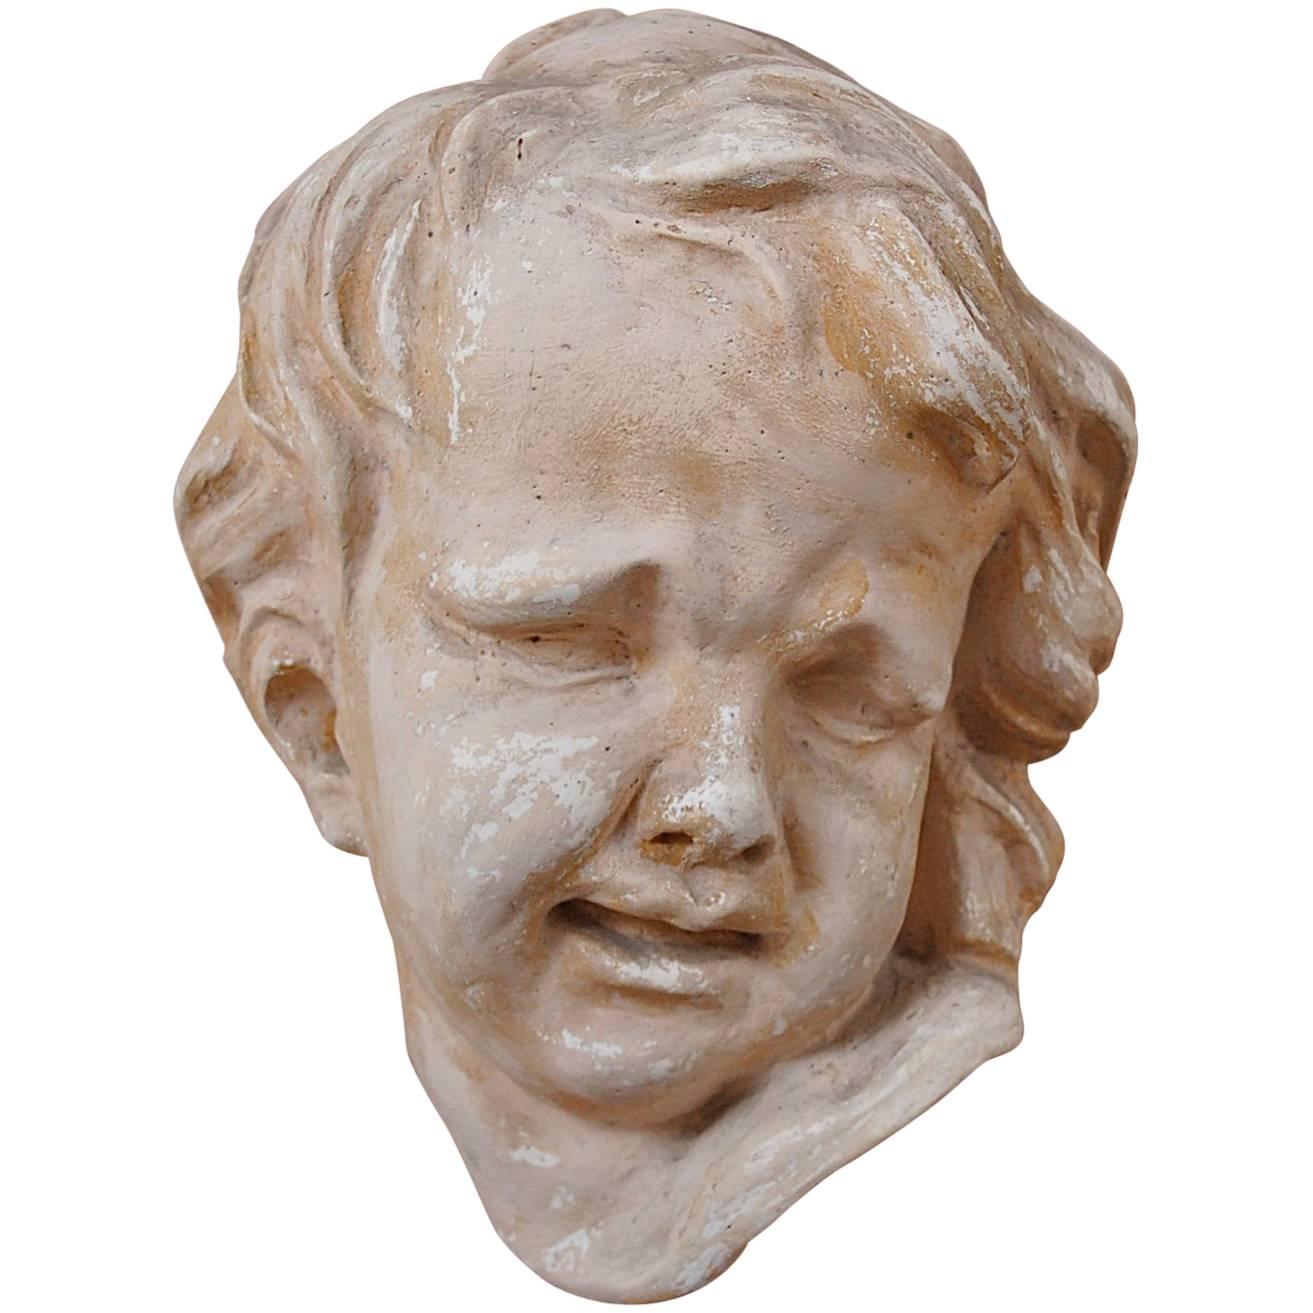 Weathered Garden Ornament or Bust of a Child, Signed by Artist For Sale